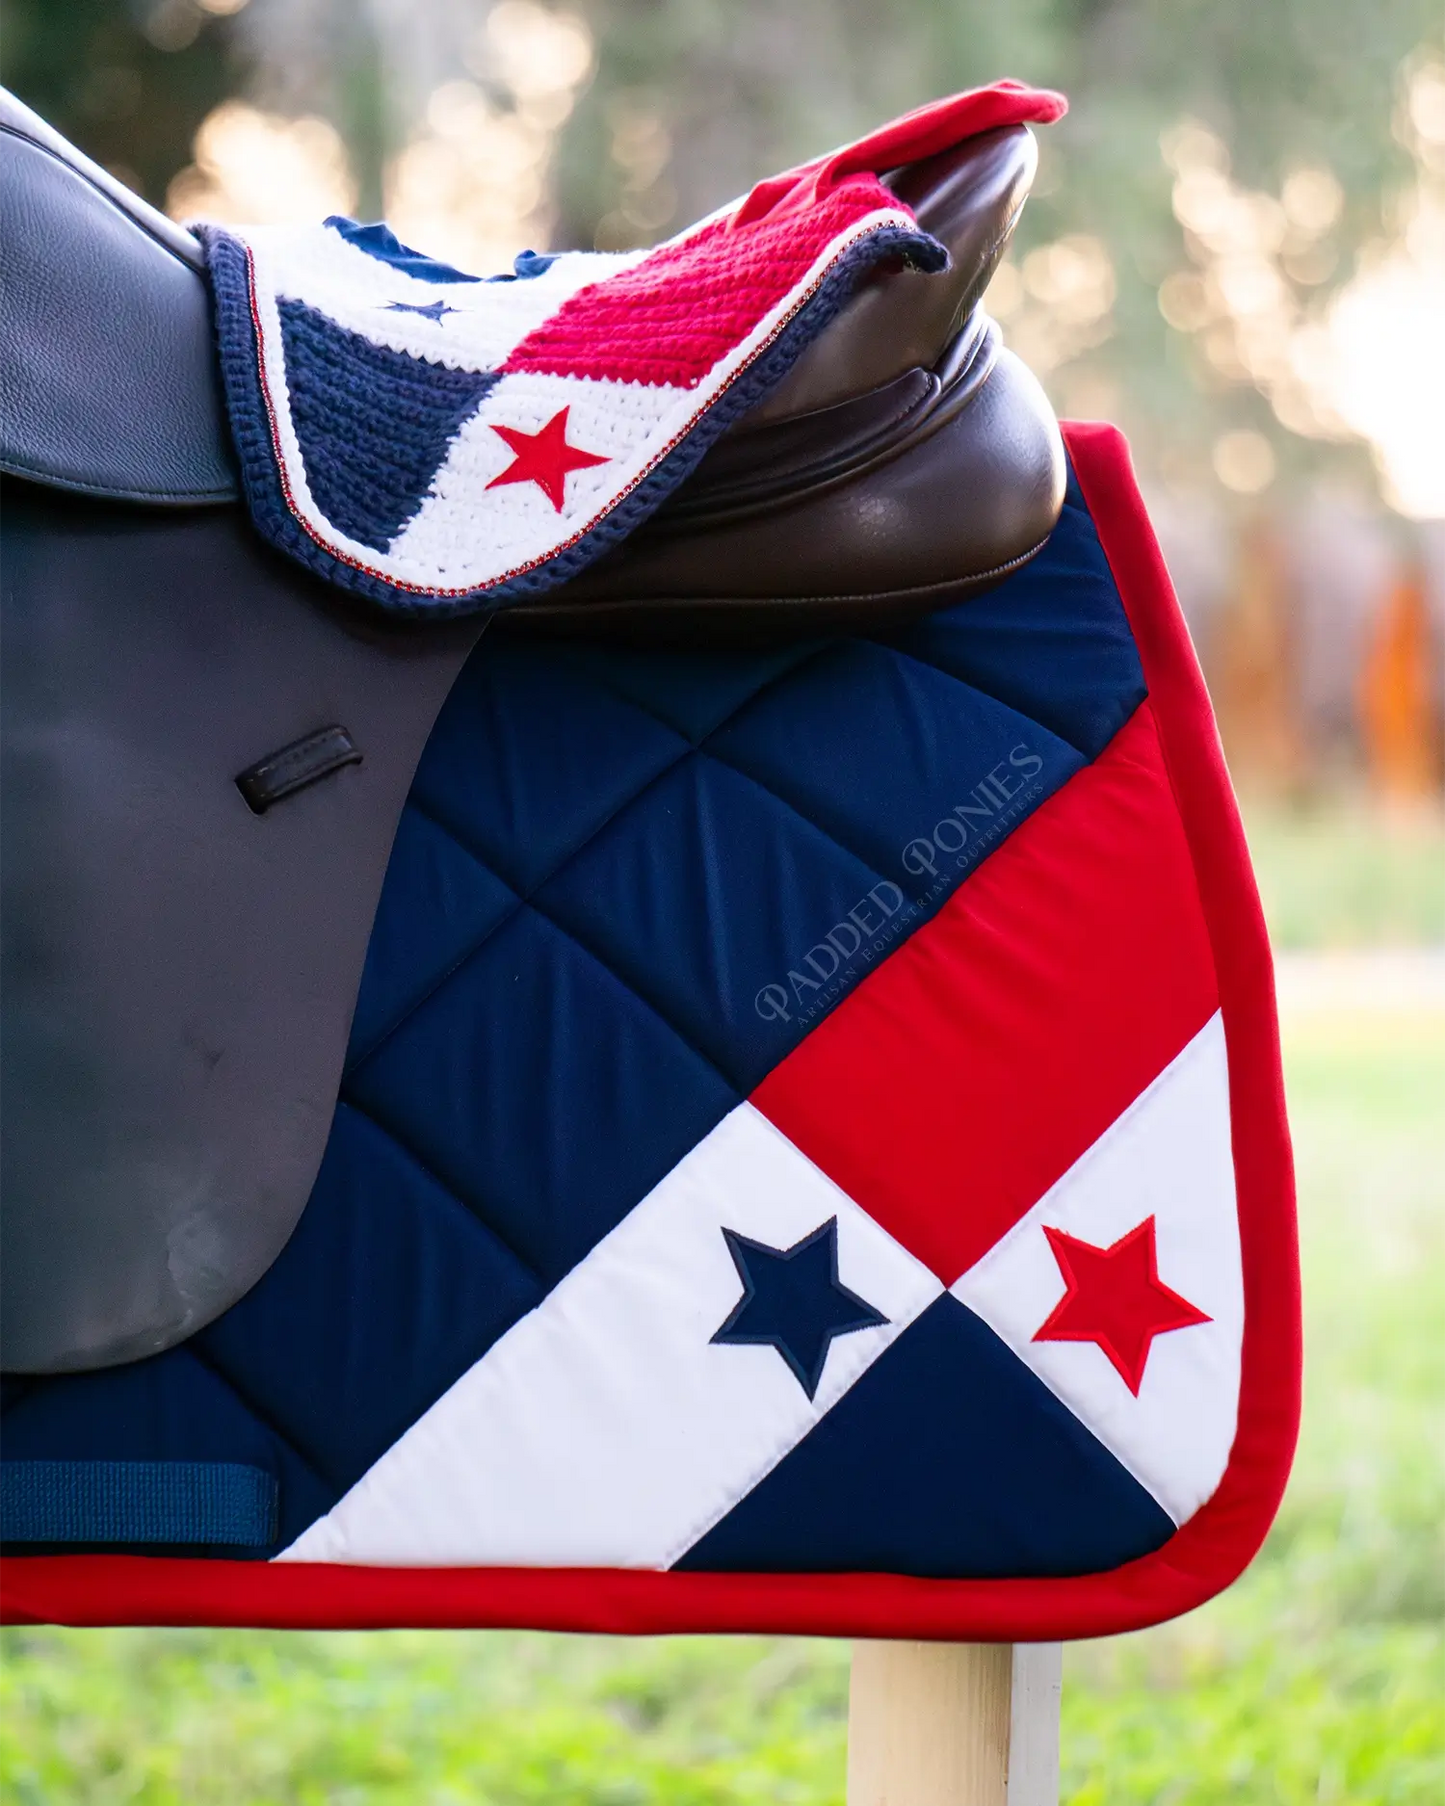 Red, White, and Blue Panama Corner Flag Patriotic Jump Saddle Pad and Matching Fly Veil Bonnet